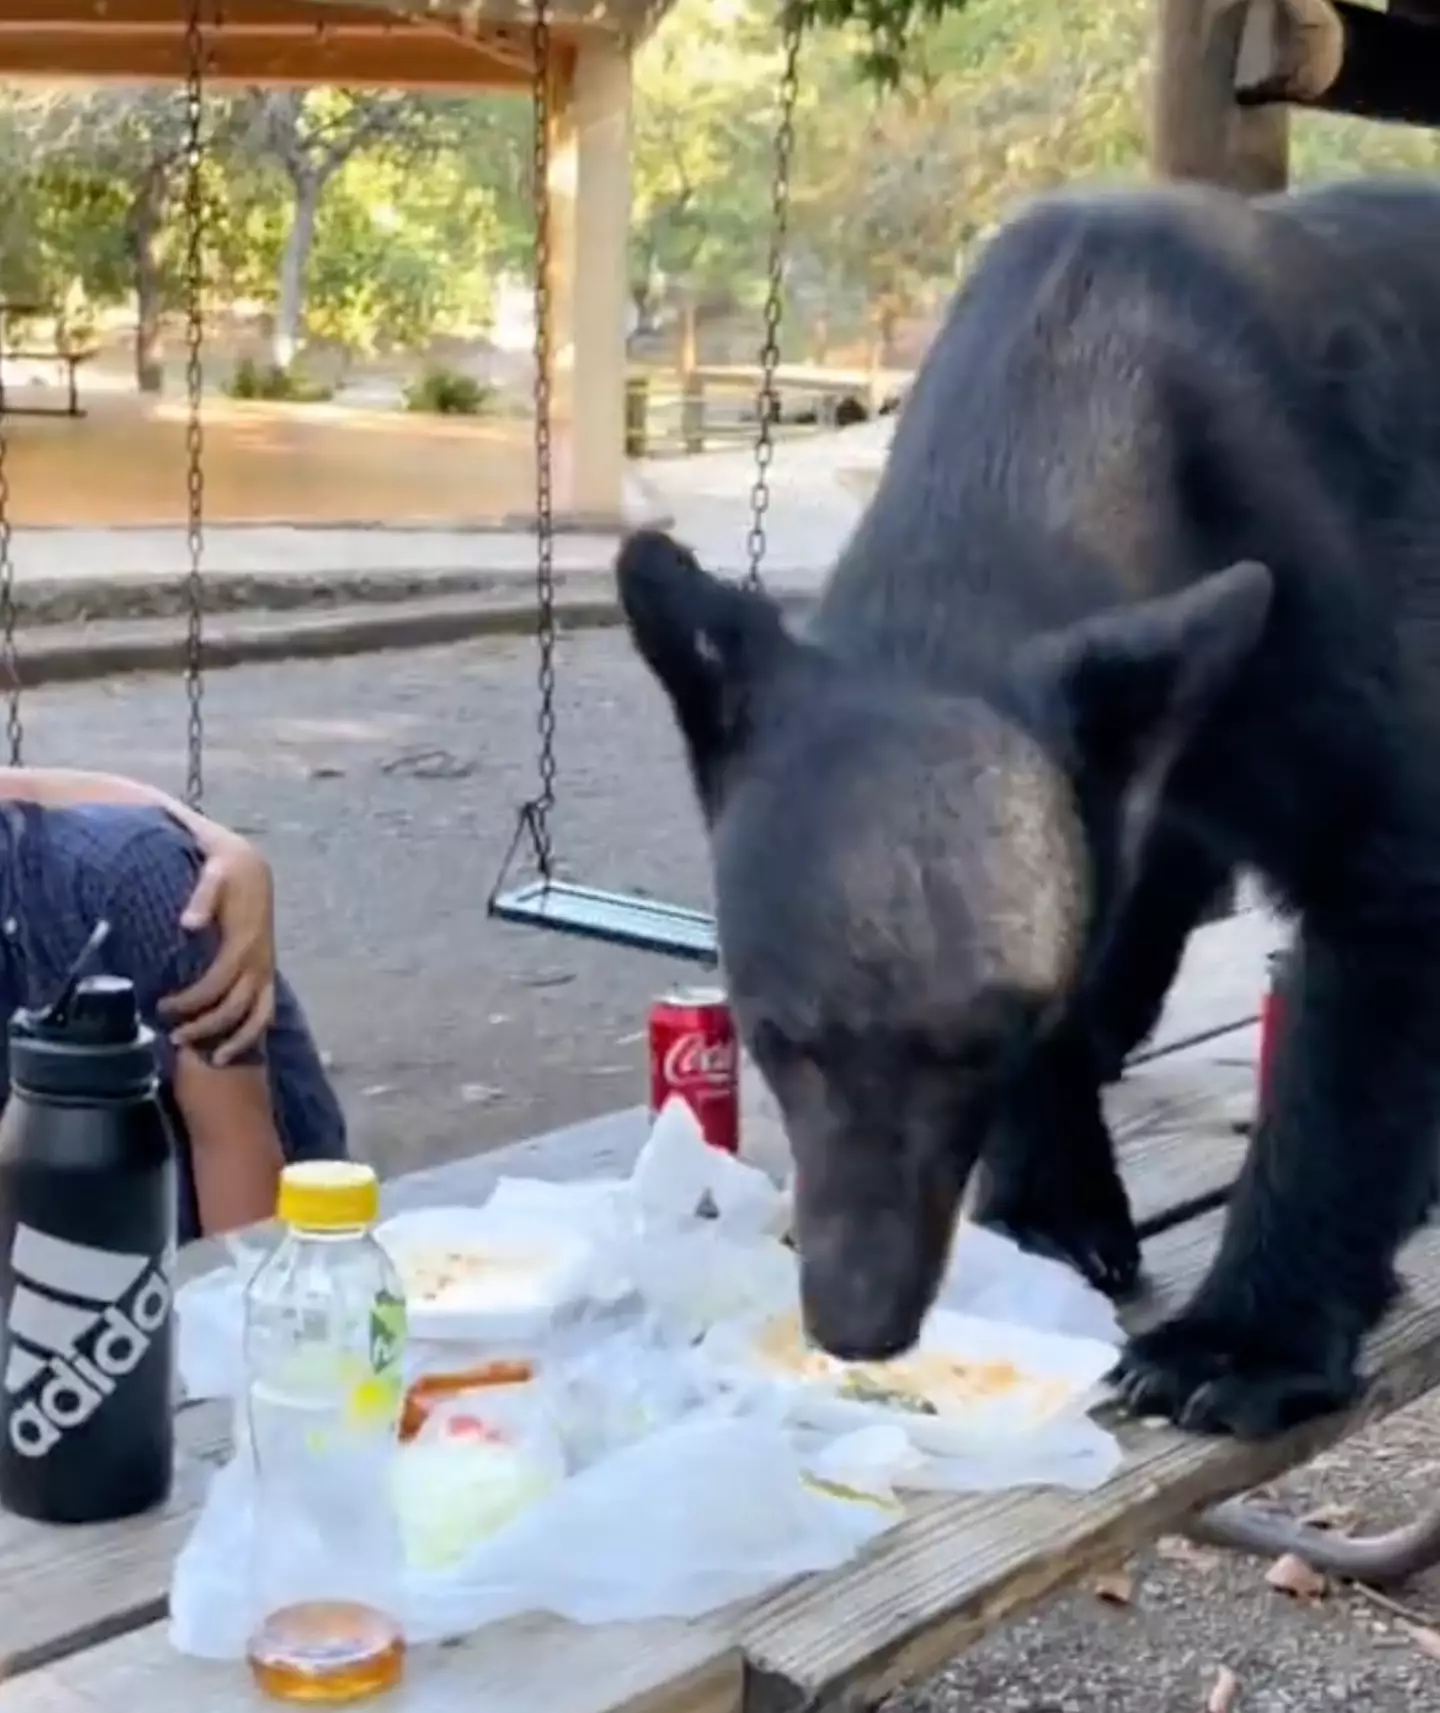 The bear interrupted the family picnic in Mexico's Chipinque Ecological Park.